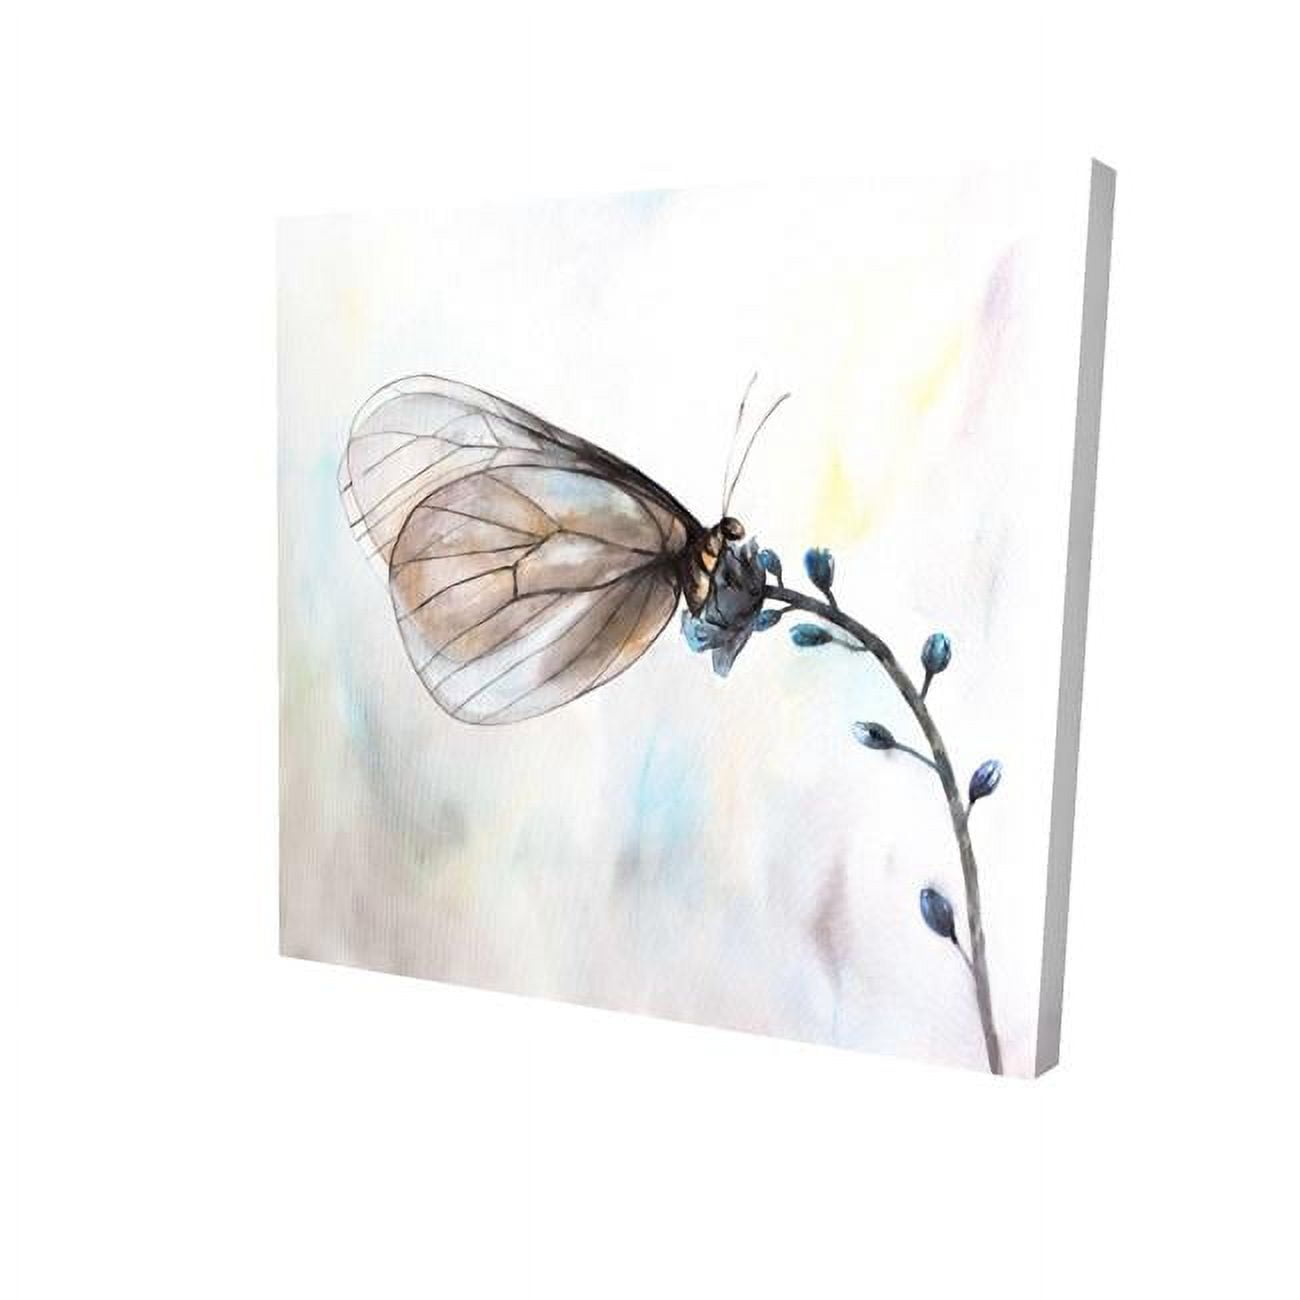 Begin Home Decor 2080-1616-AN345 16 x 16 in. Butterfly on Blue Flowers-Print on Canvas